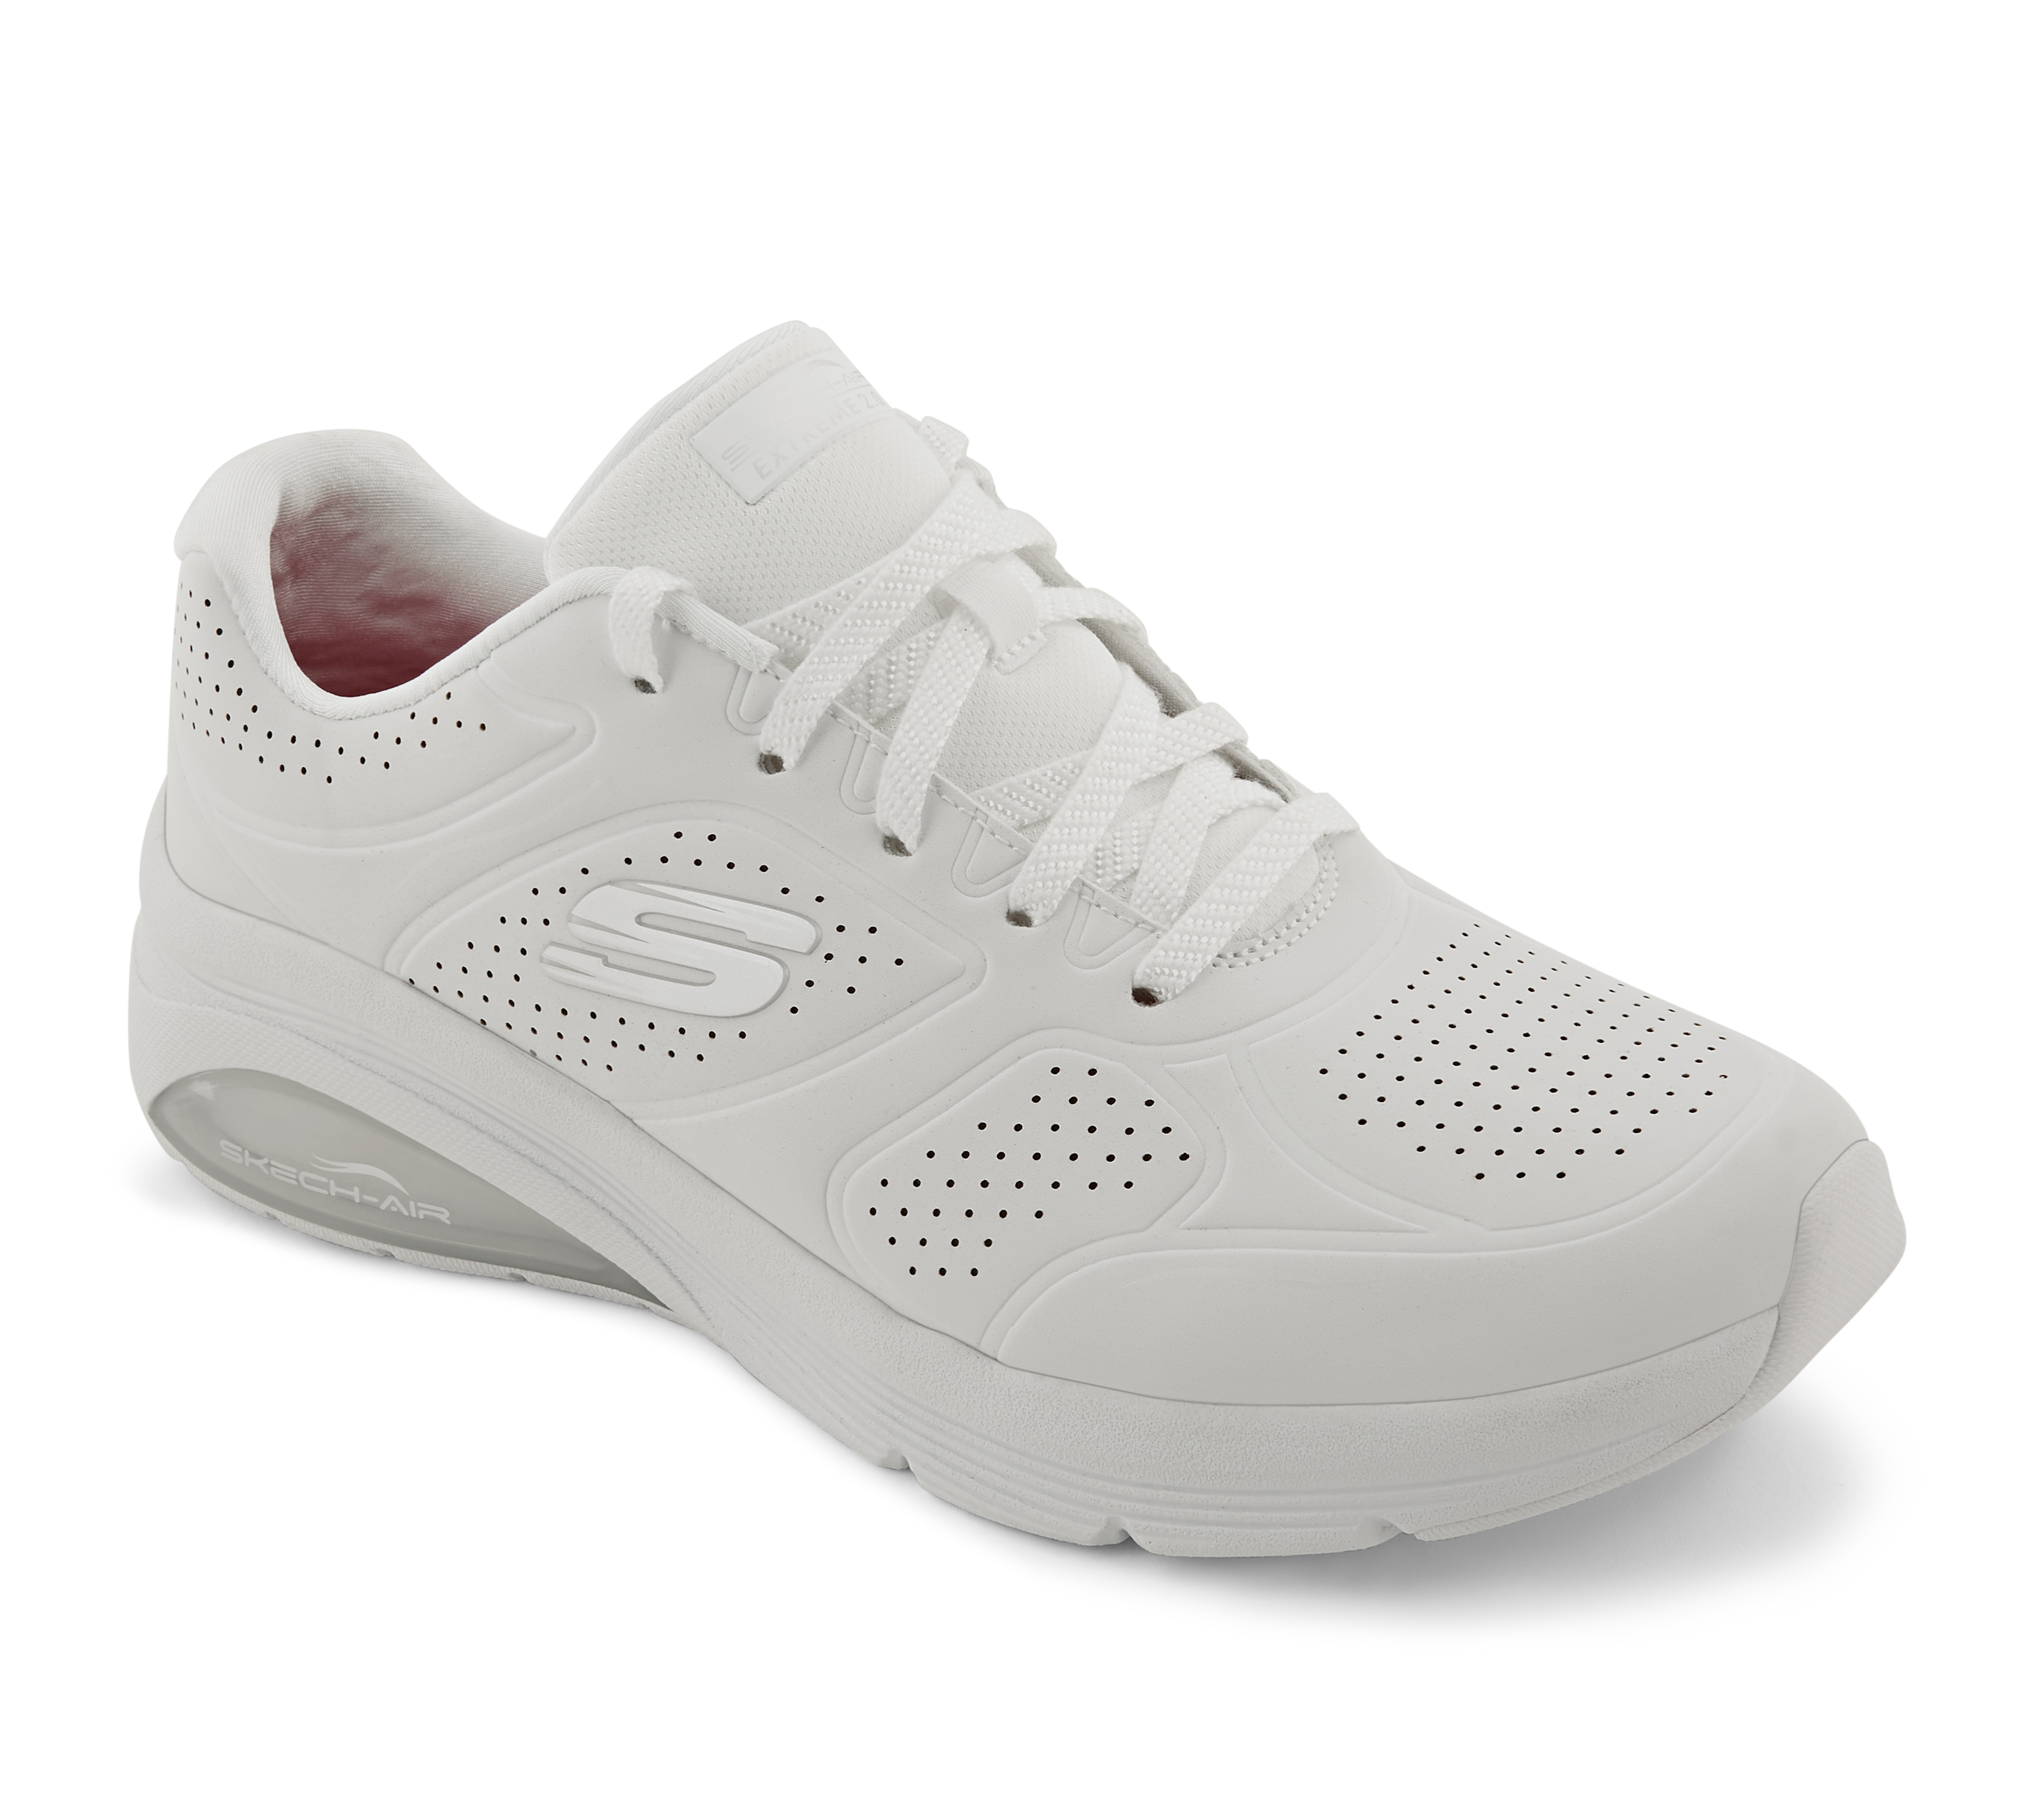 SKECH-AIR EXTREME 2.0-CLASSIC, WWWHITE Footwear Lateral View